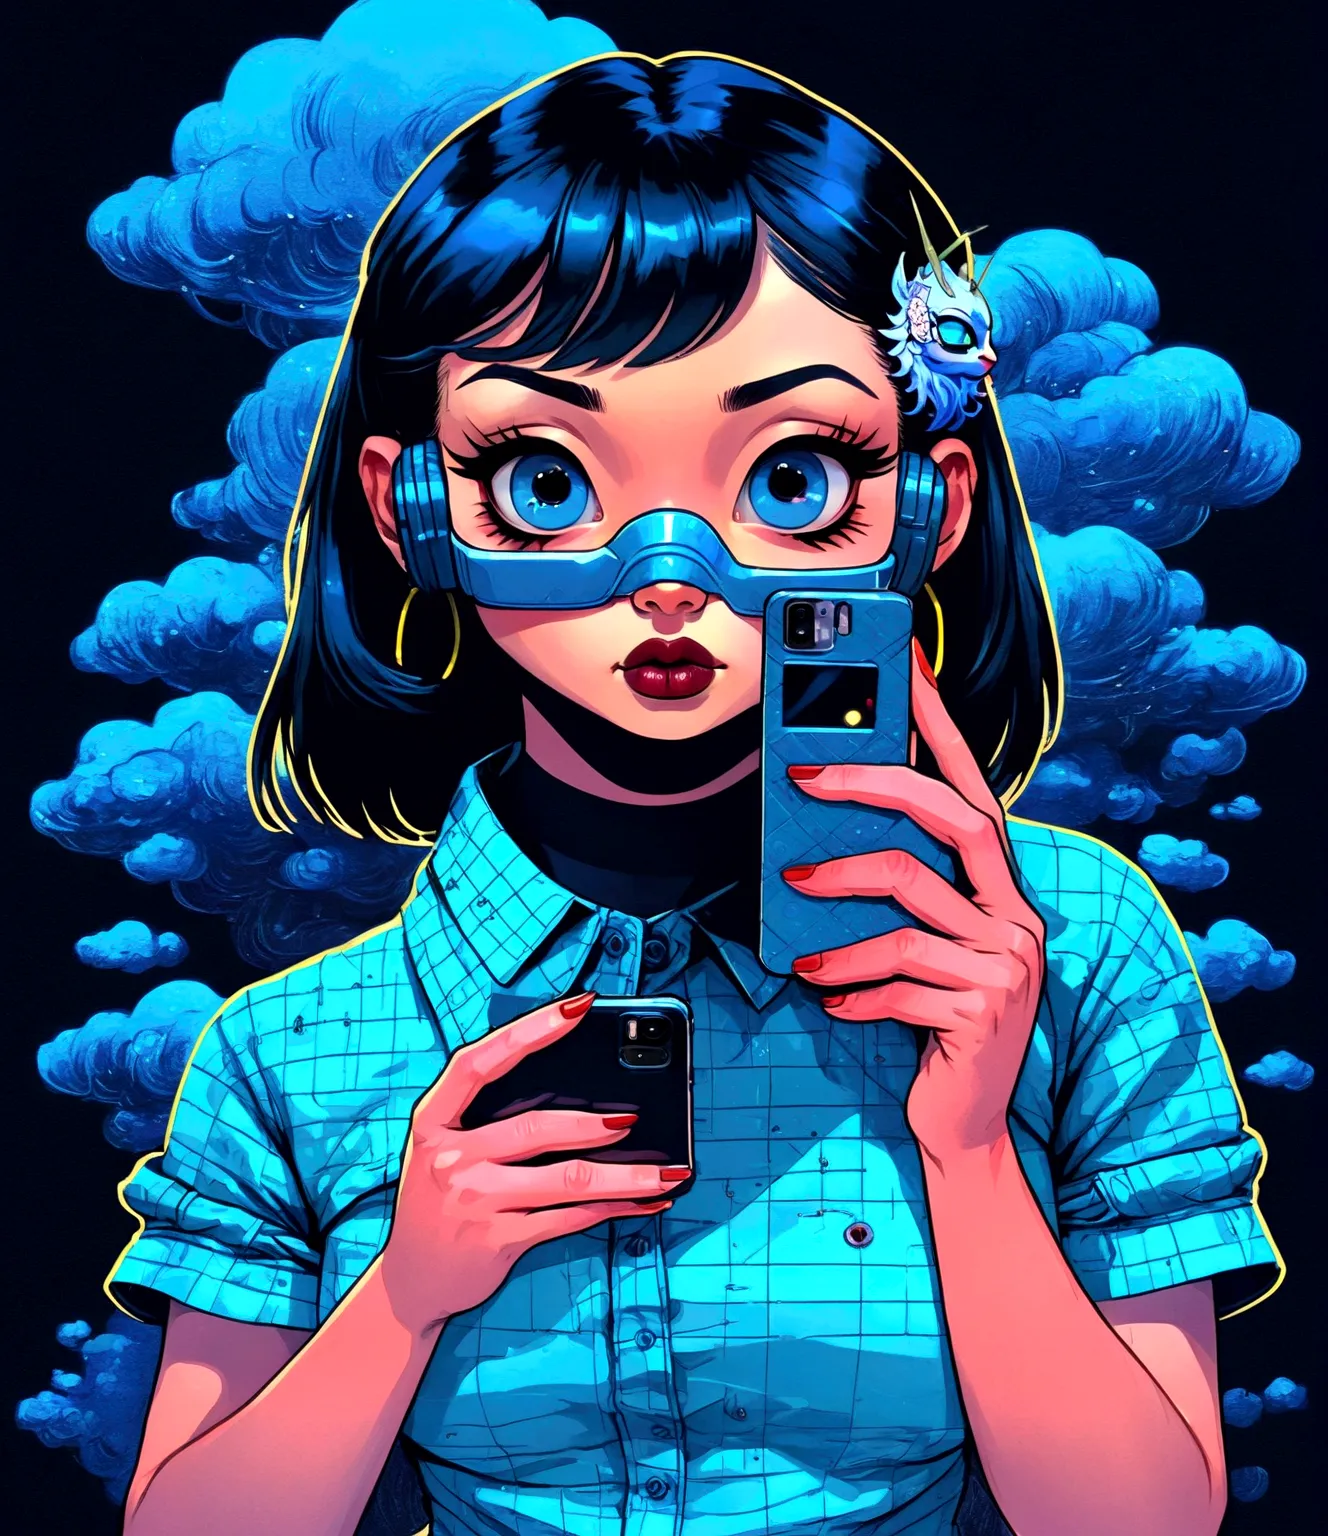 a close up of a person with a cell phone in their hand, cyberpunk art inspired by Harumi Hironaka, tumblr, digital art, jen bart...